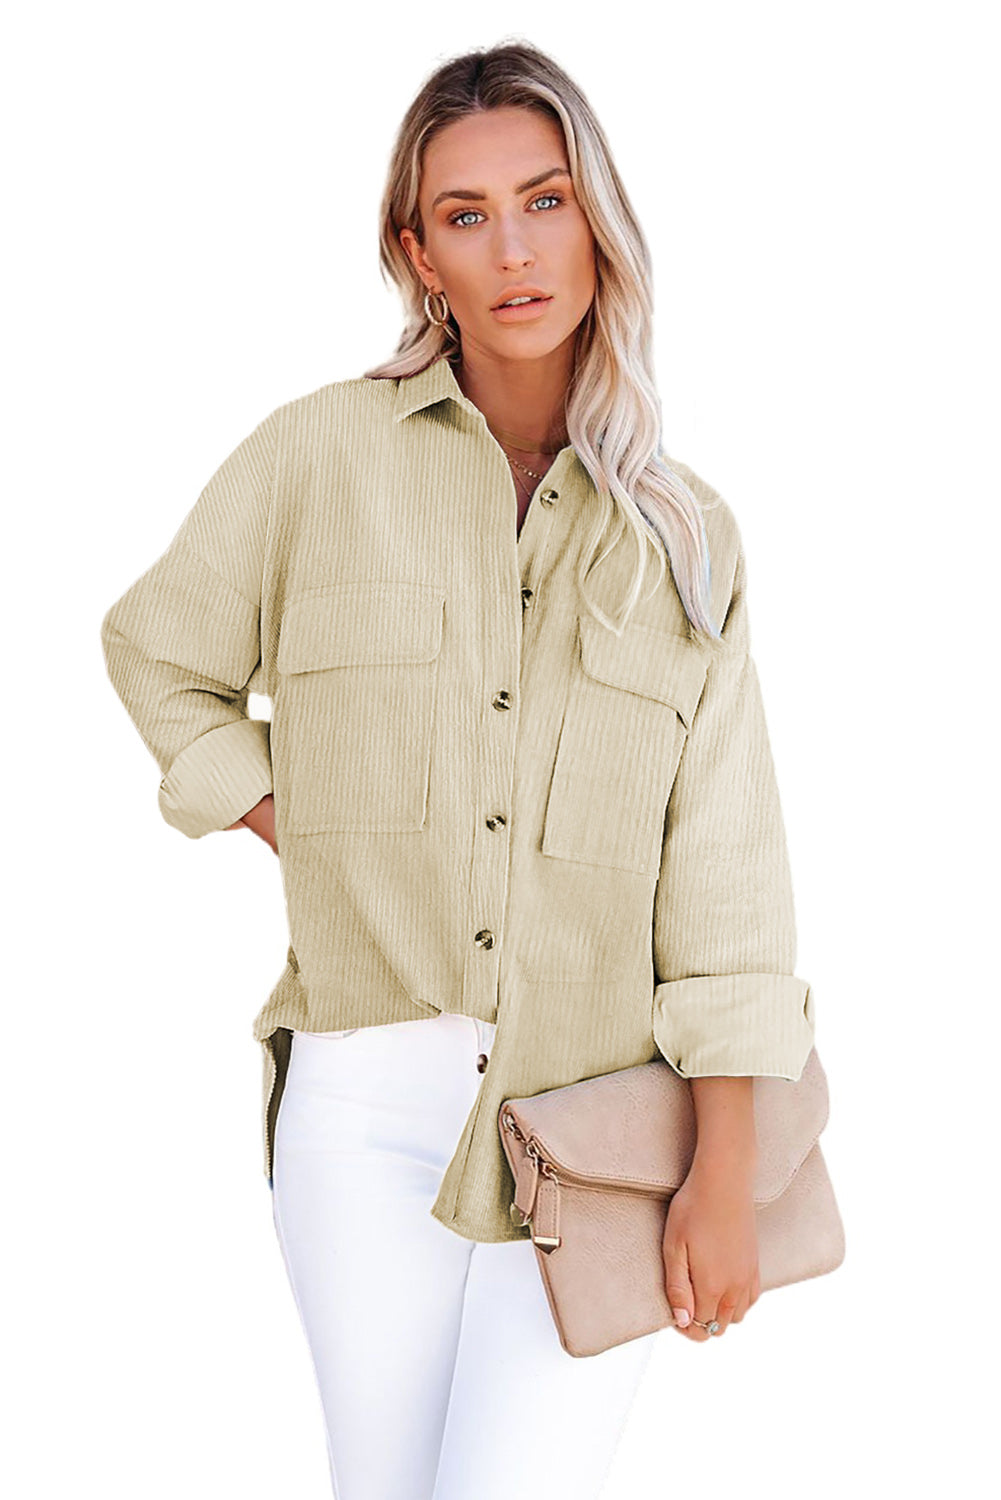 LC8511383-15-S, LC8511383-15-M, LC8511383-15-L, LC8511383-15-XL, LC8511383-15-2XL, Beige Womens Boyfriend Shirt Ribbed Shacket Loose Fit Long Sleeve Tops